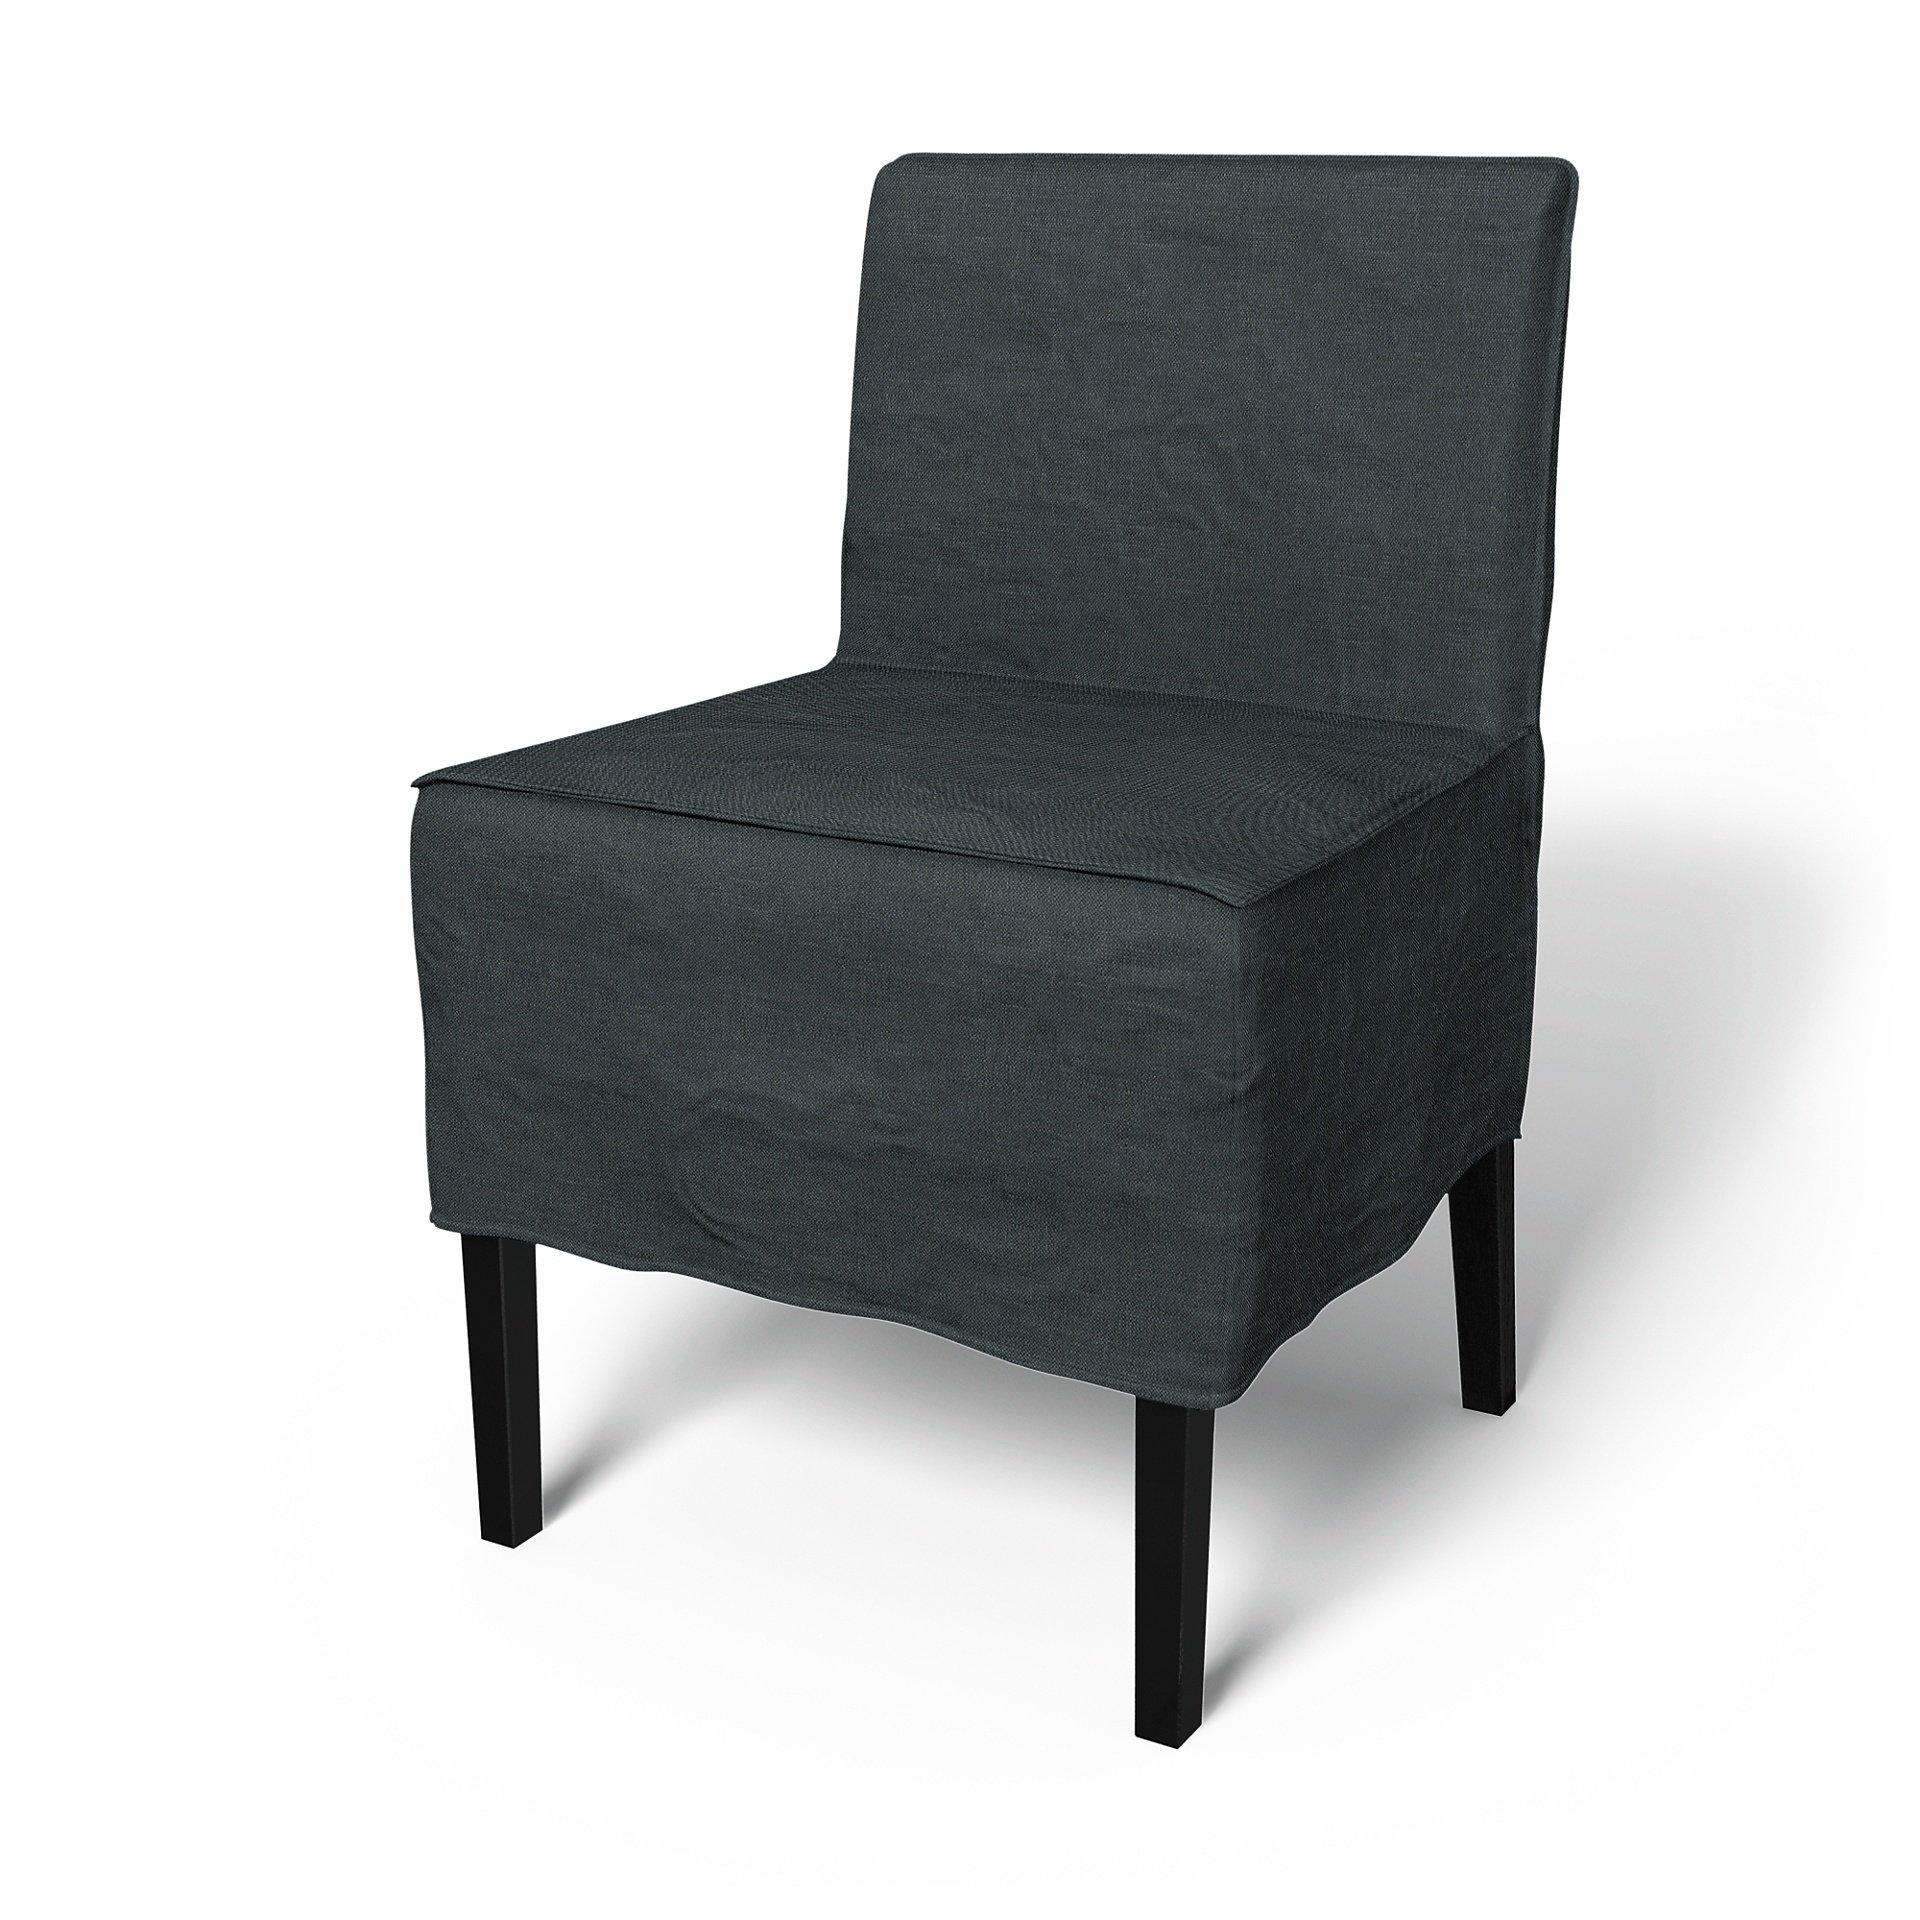 IKEA - Nils Dining Chair Cover, Graphite Grey, Linen - Bemz